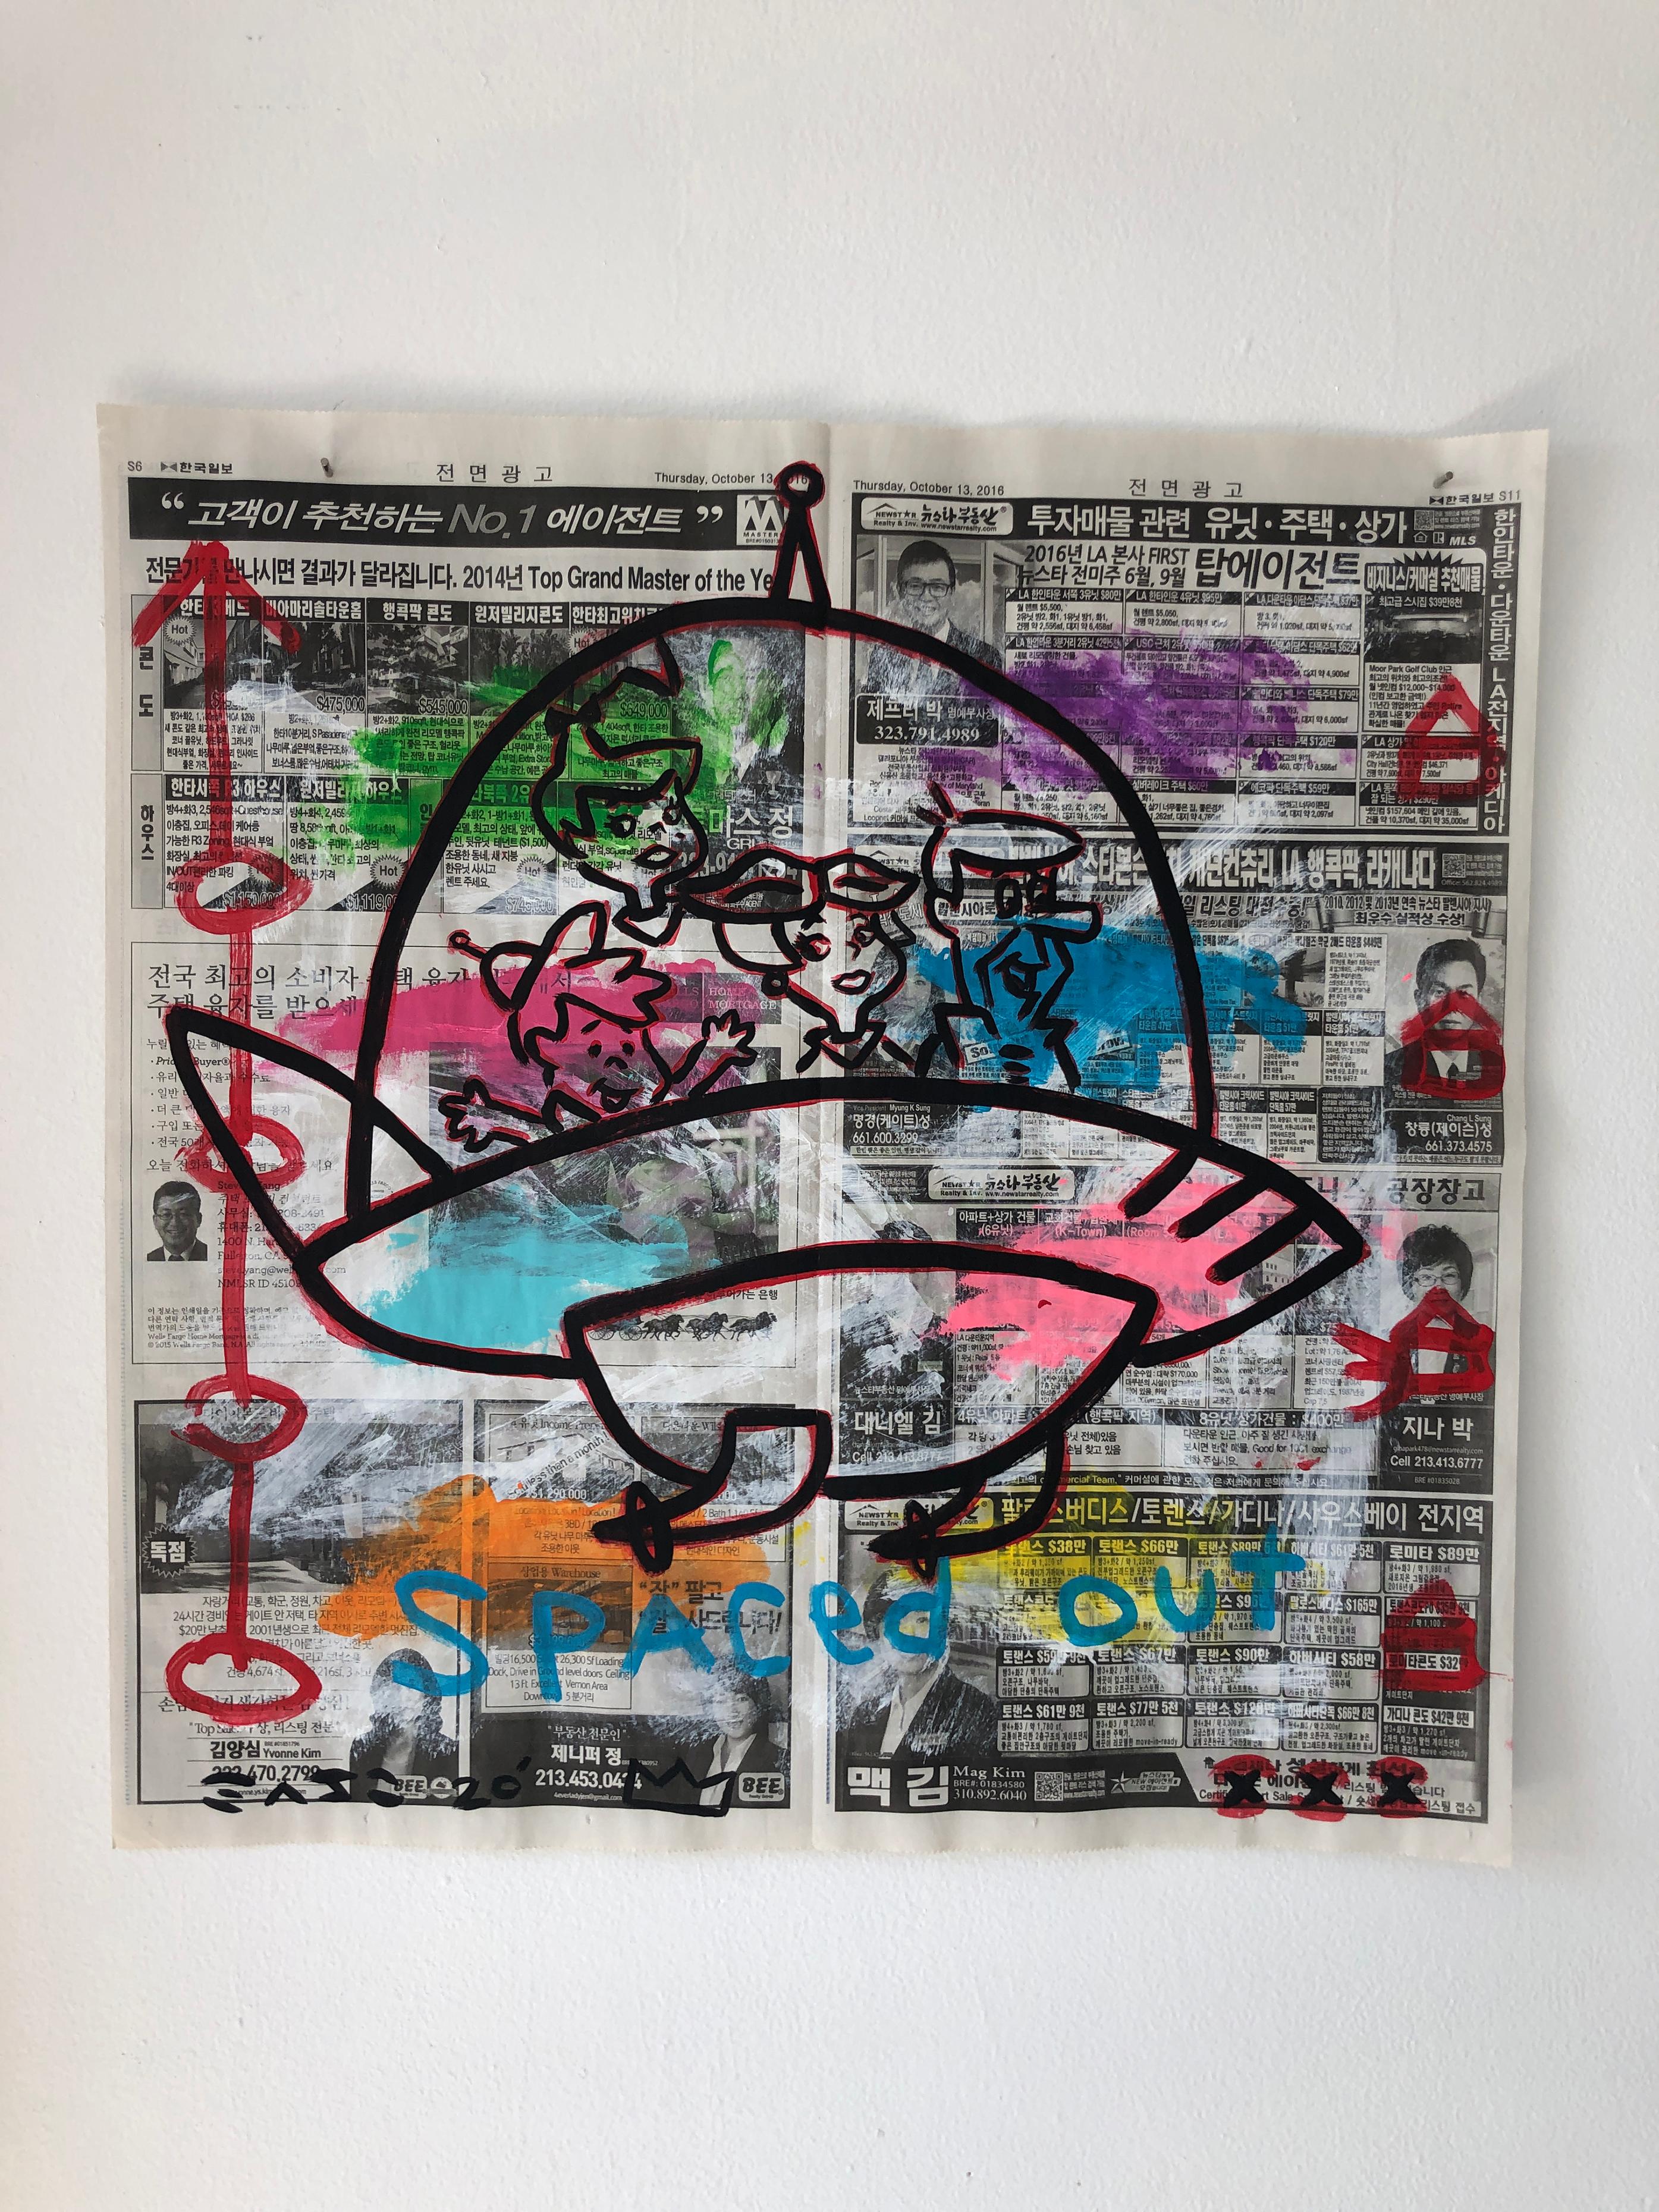 "Jetson's Space Ship" Acrylic and Collage on Korean newsprint